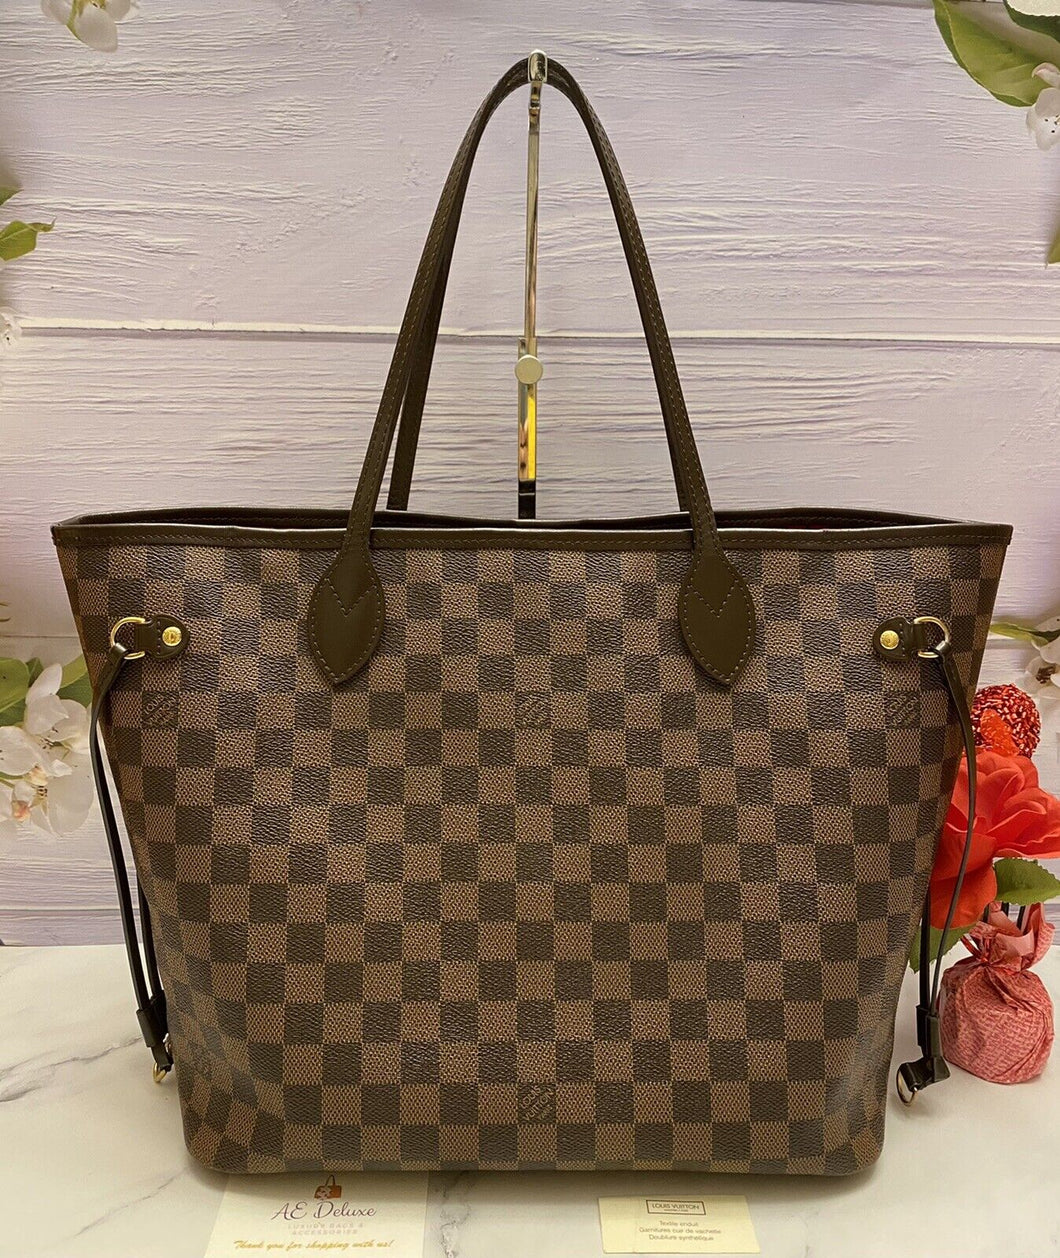 Louis Vuitton Neverfull MM Damier Ebene Cherry Red Tote (SD4114)